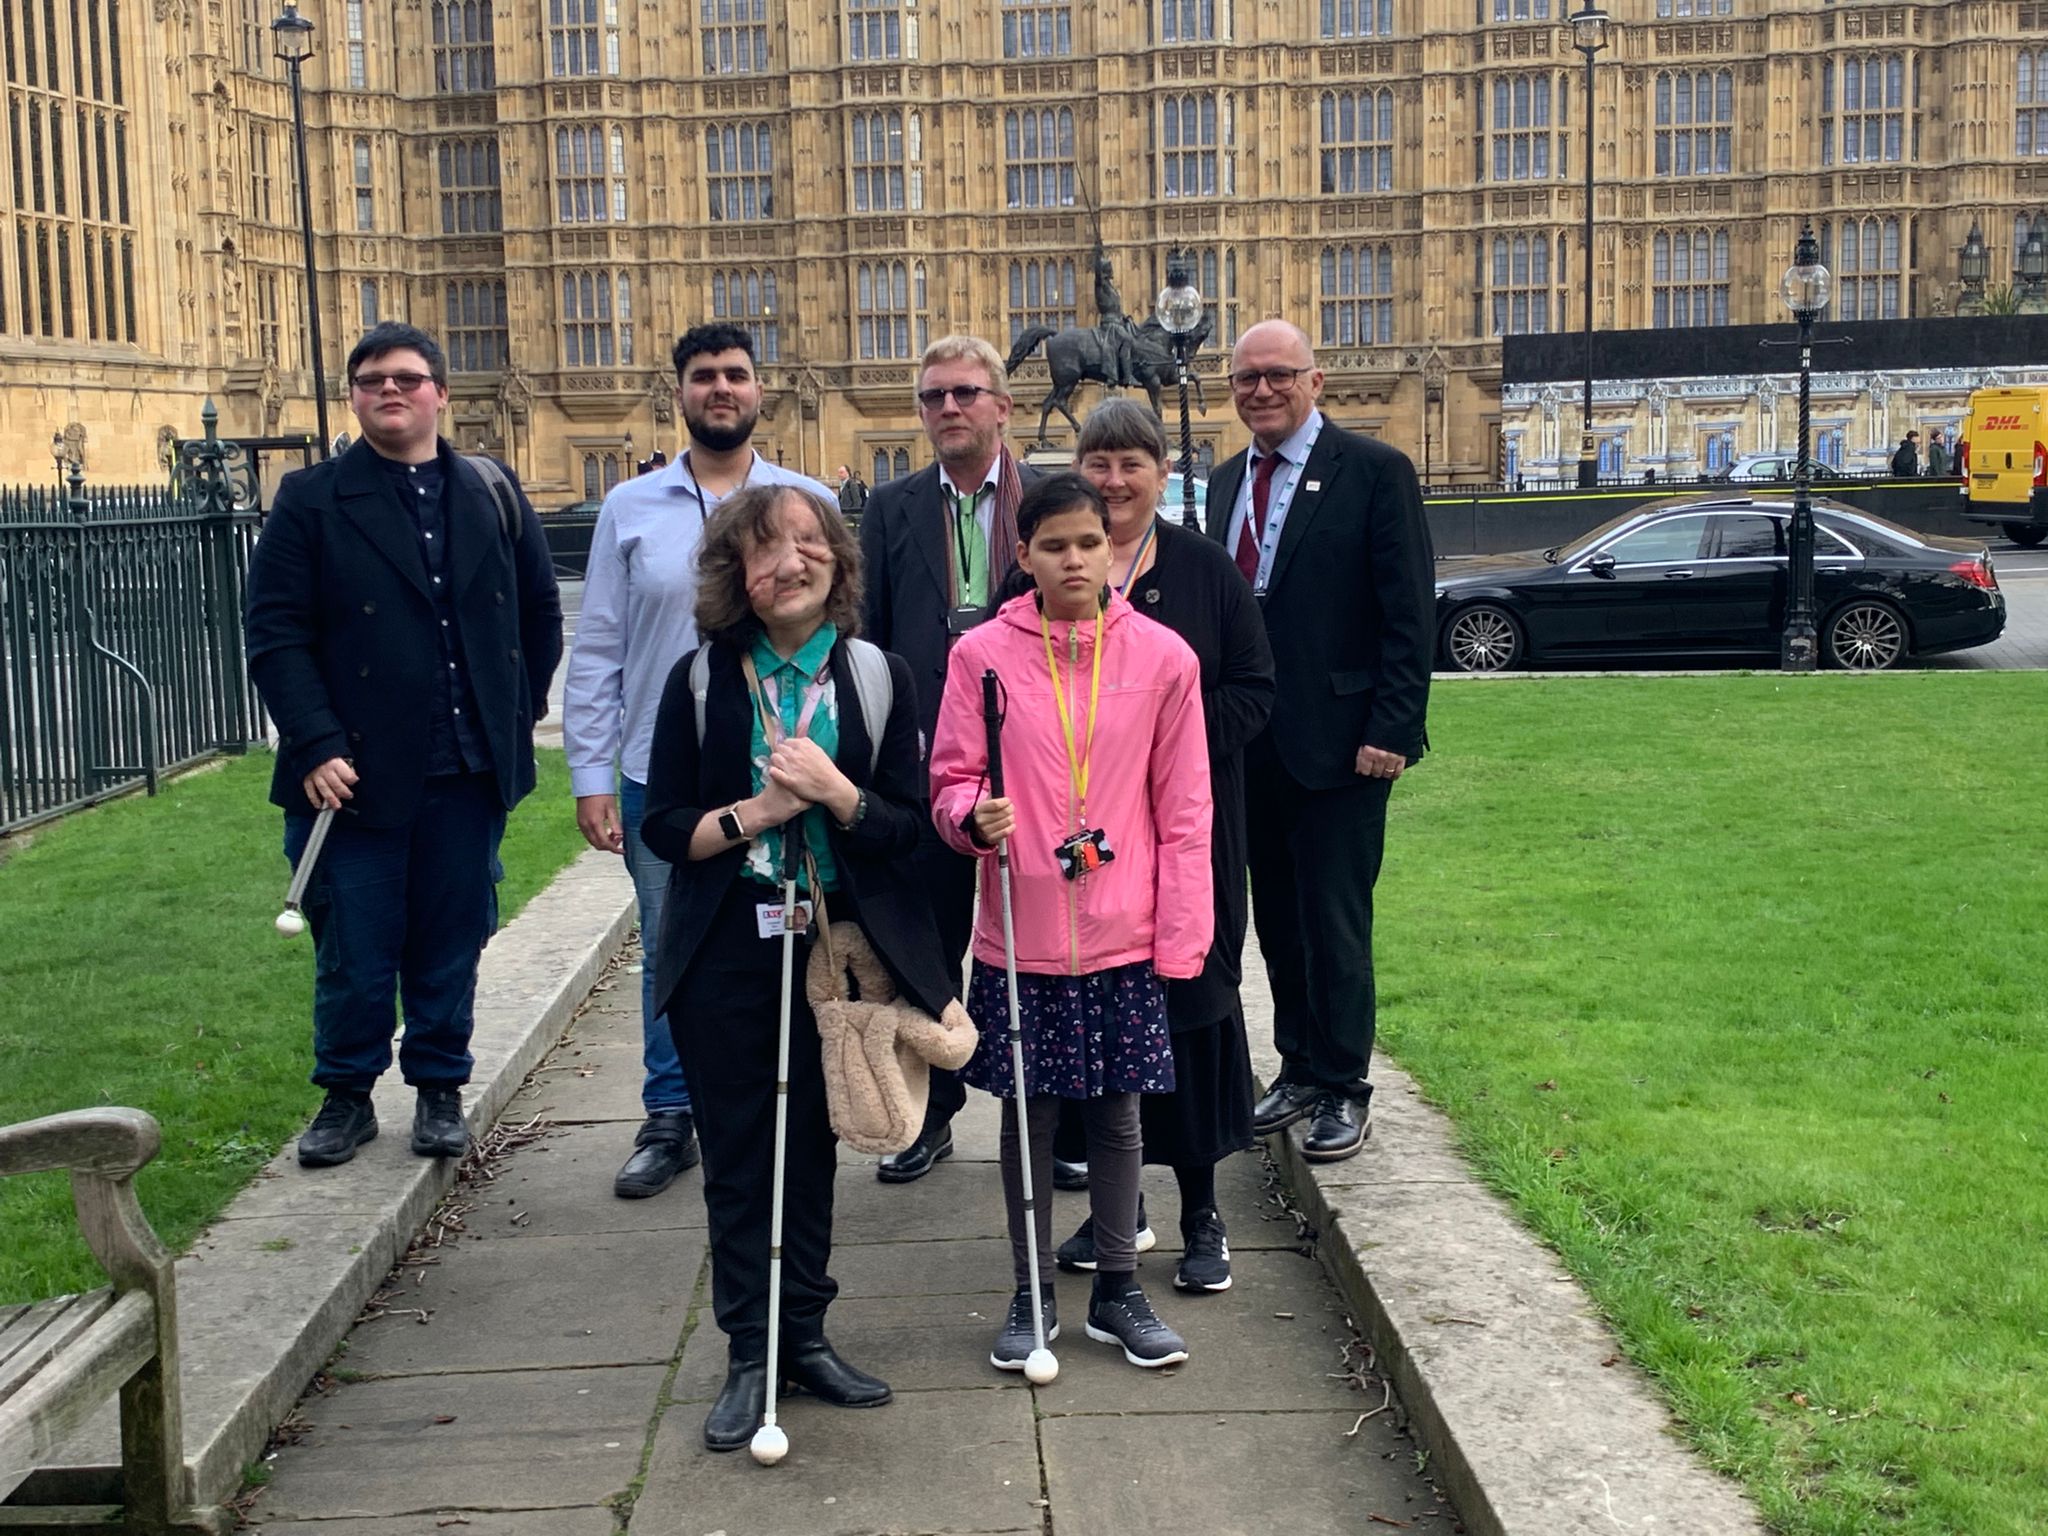 a group of 7 staff and students standing in front of the Houses of Parliament